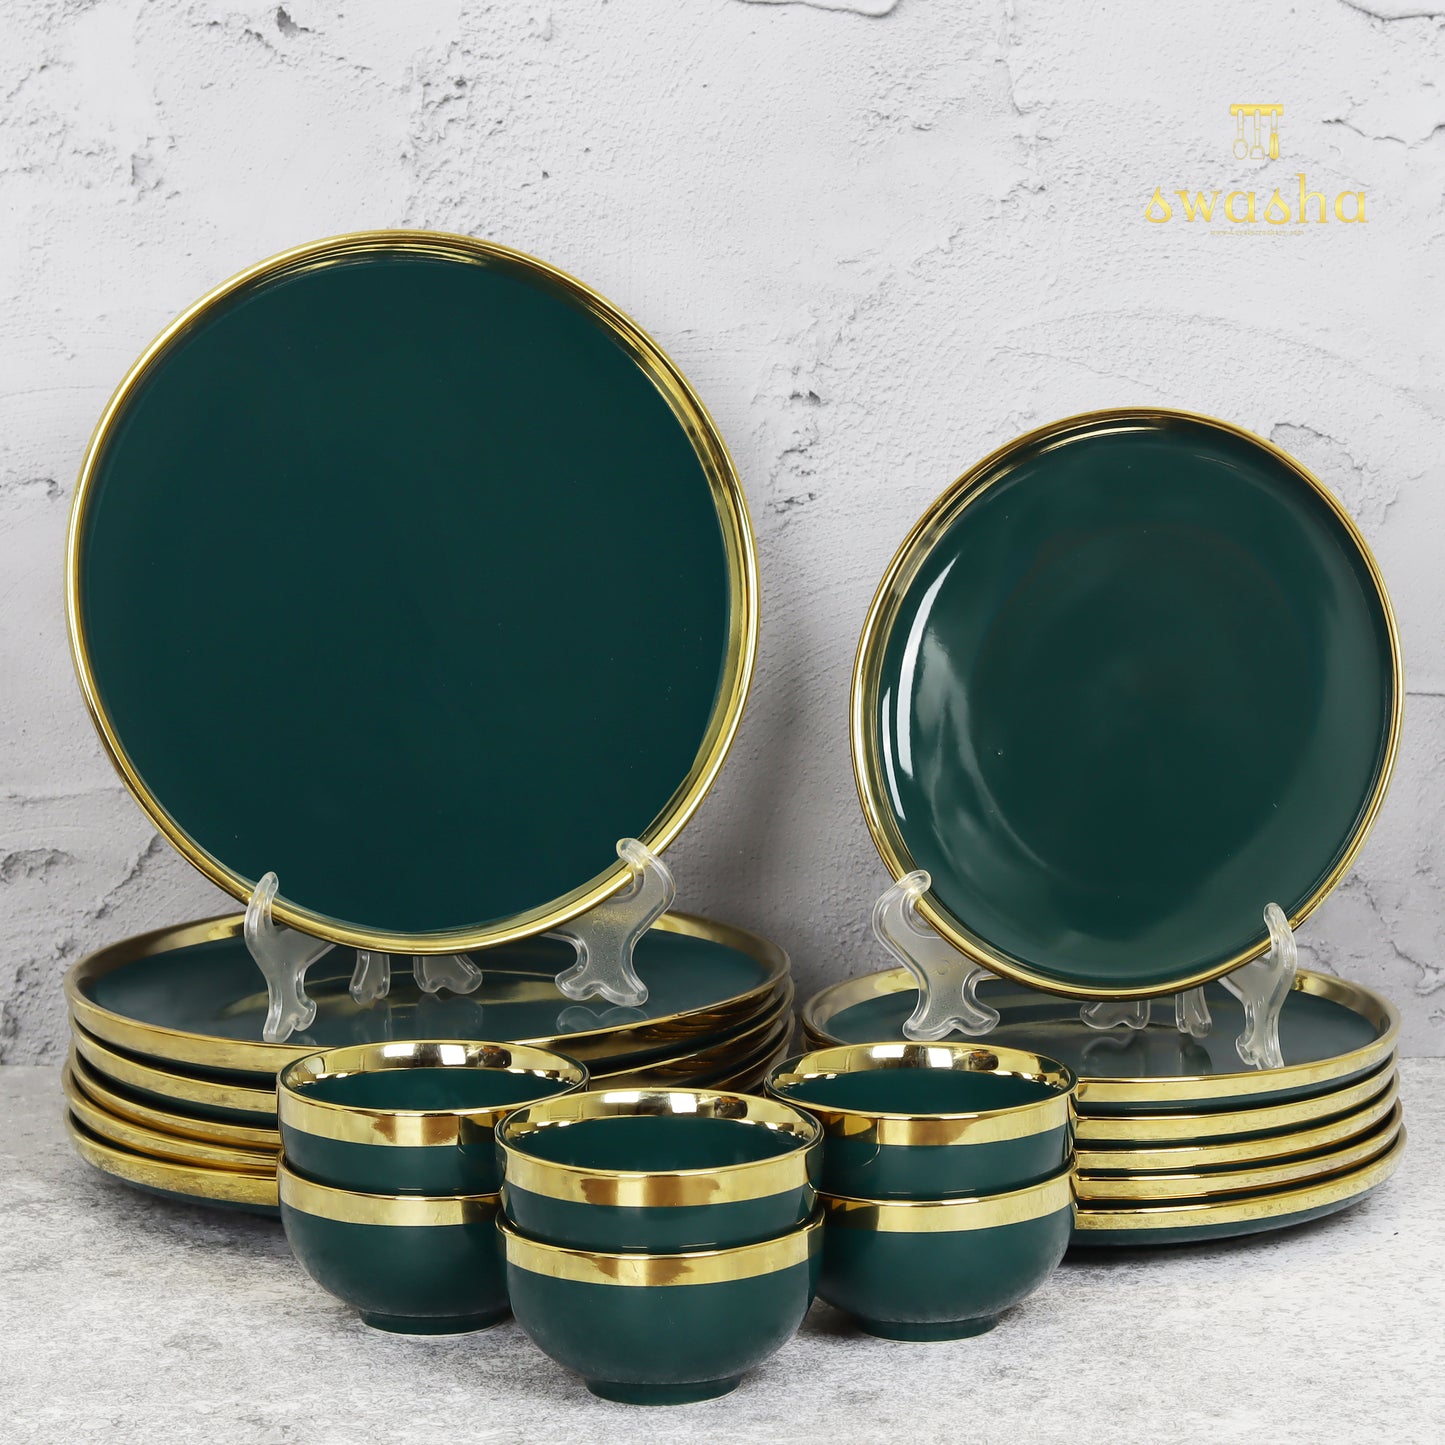 Personalized 18-piece ceramic dinner set - elevate dining with your unique touch